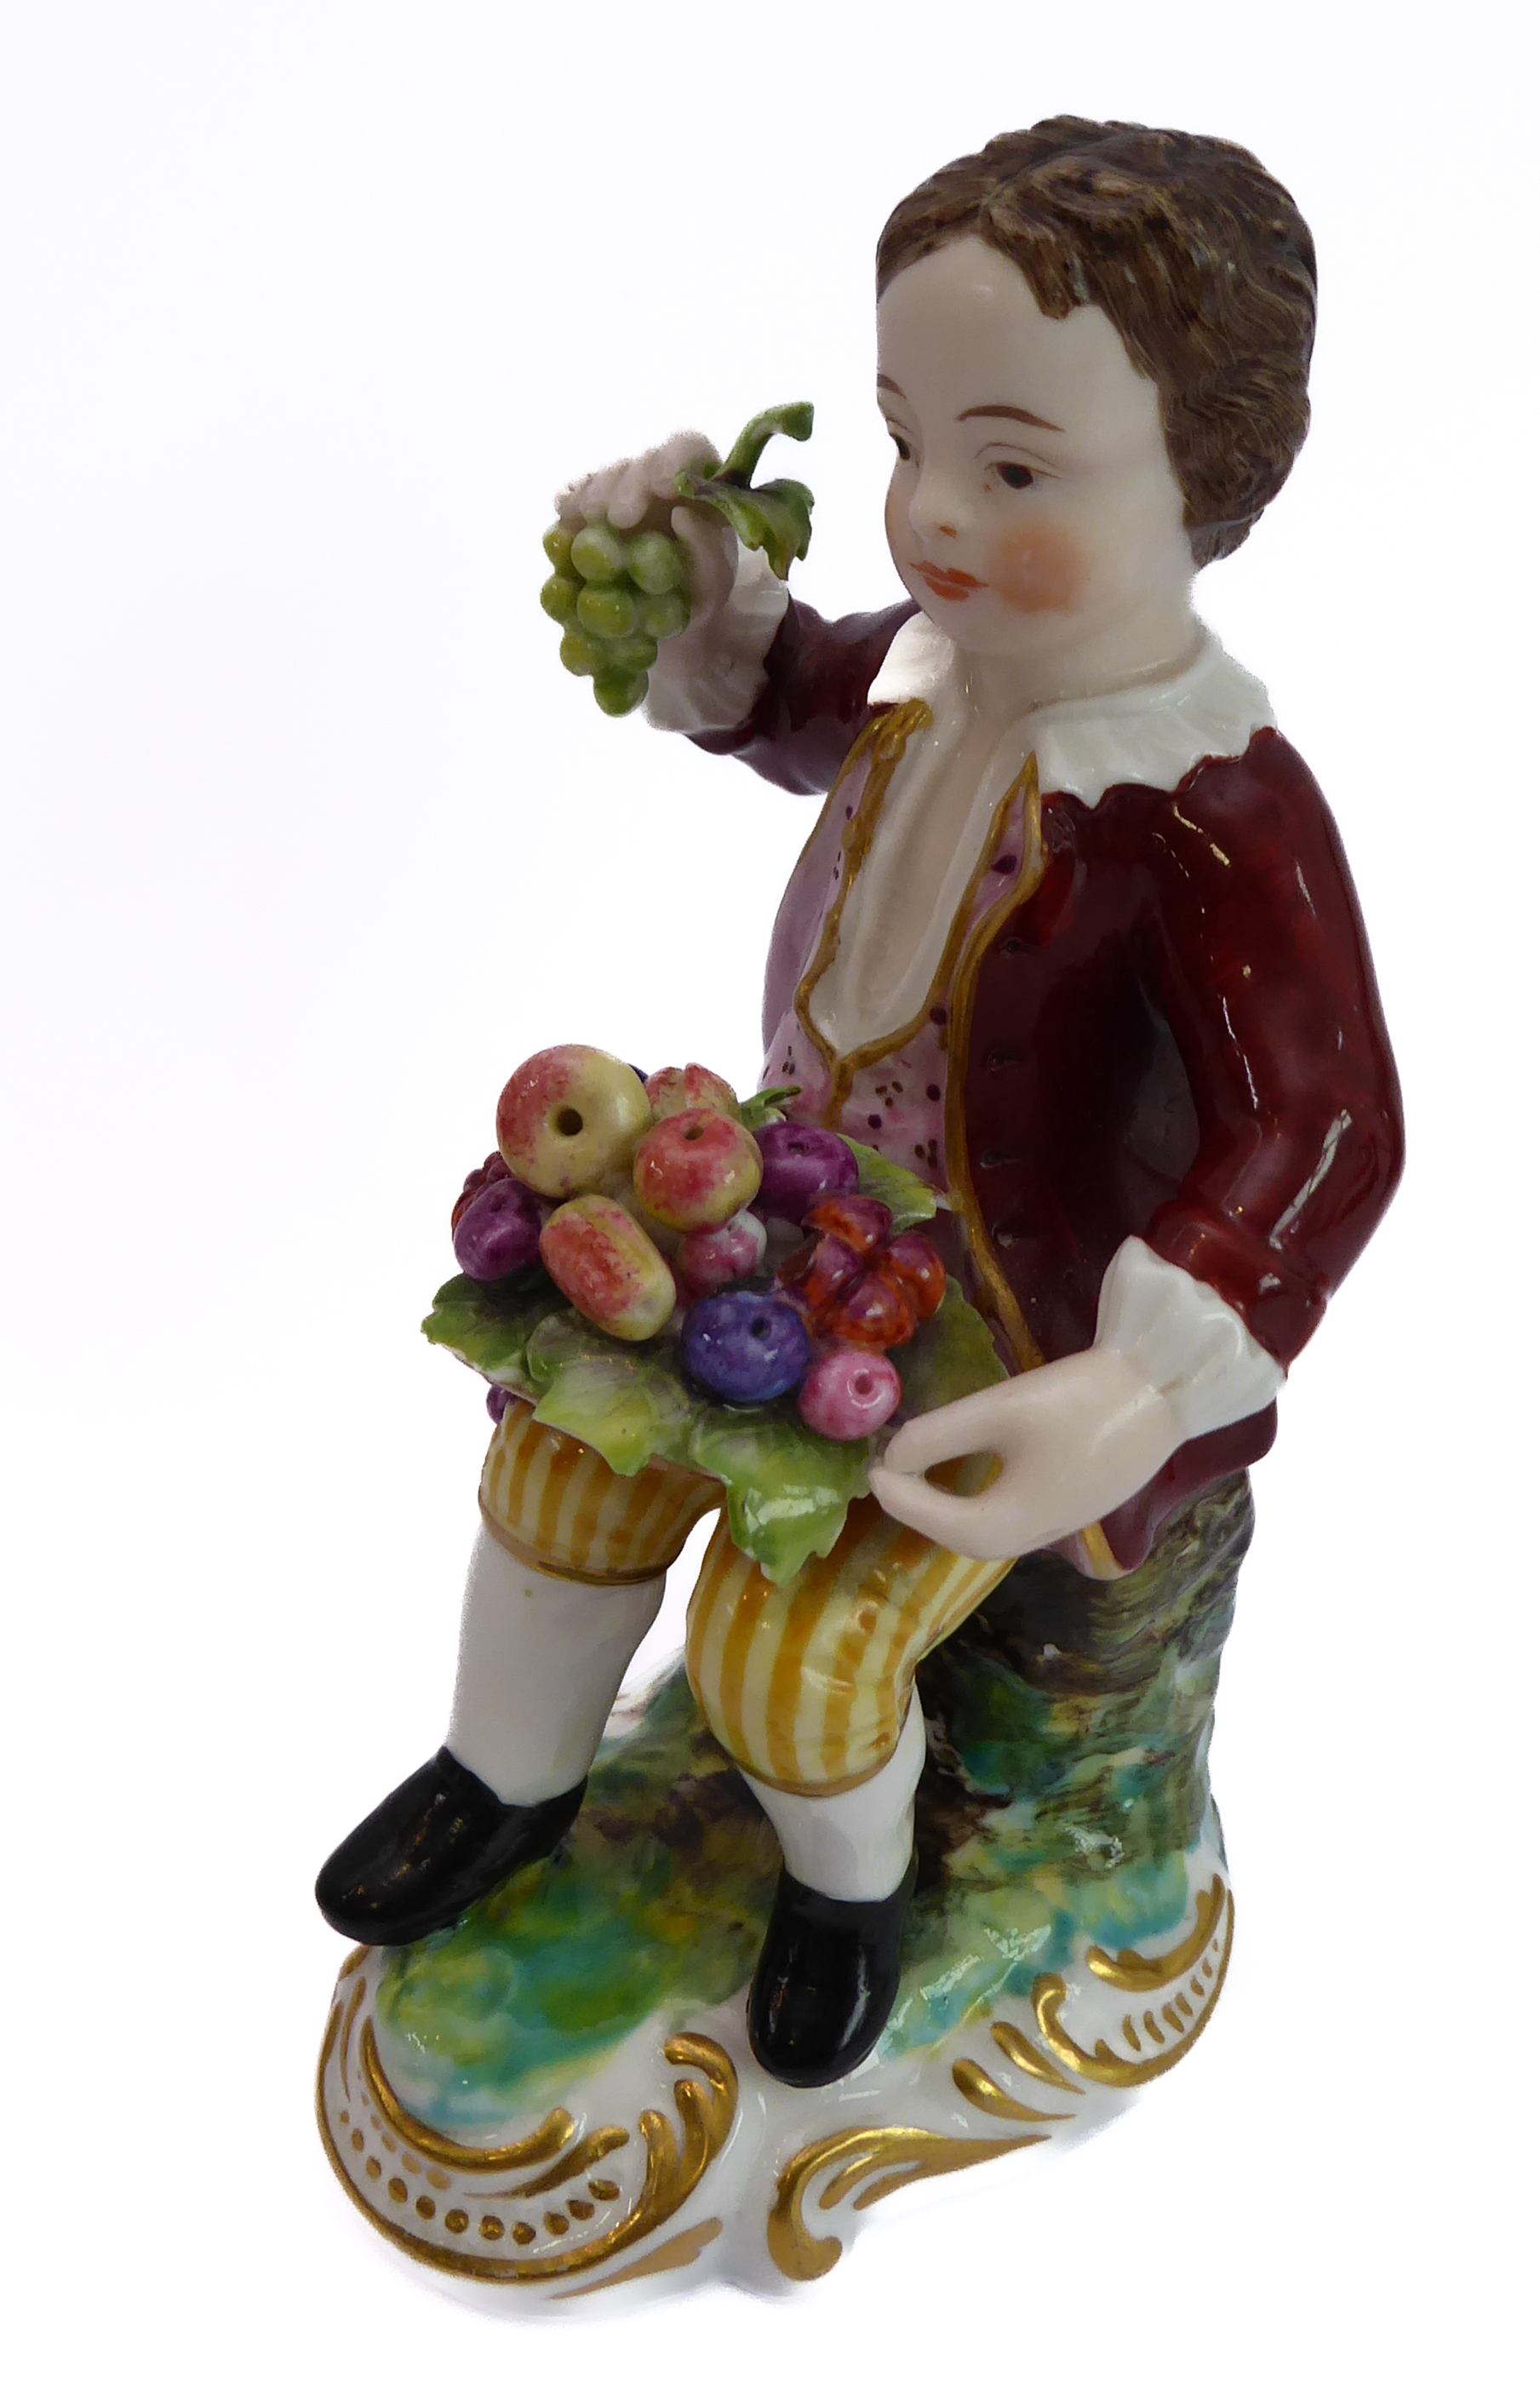 A hand-decorated Derby-style porcelain figure of a young boy - seated and holding in his right